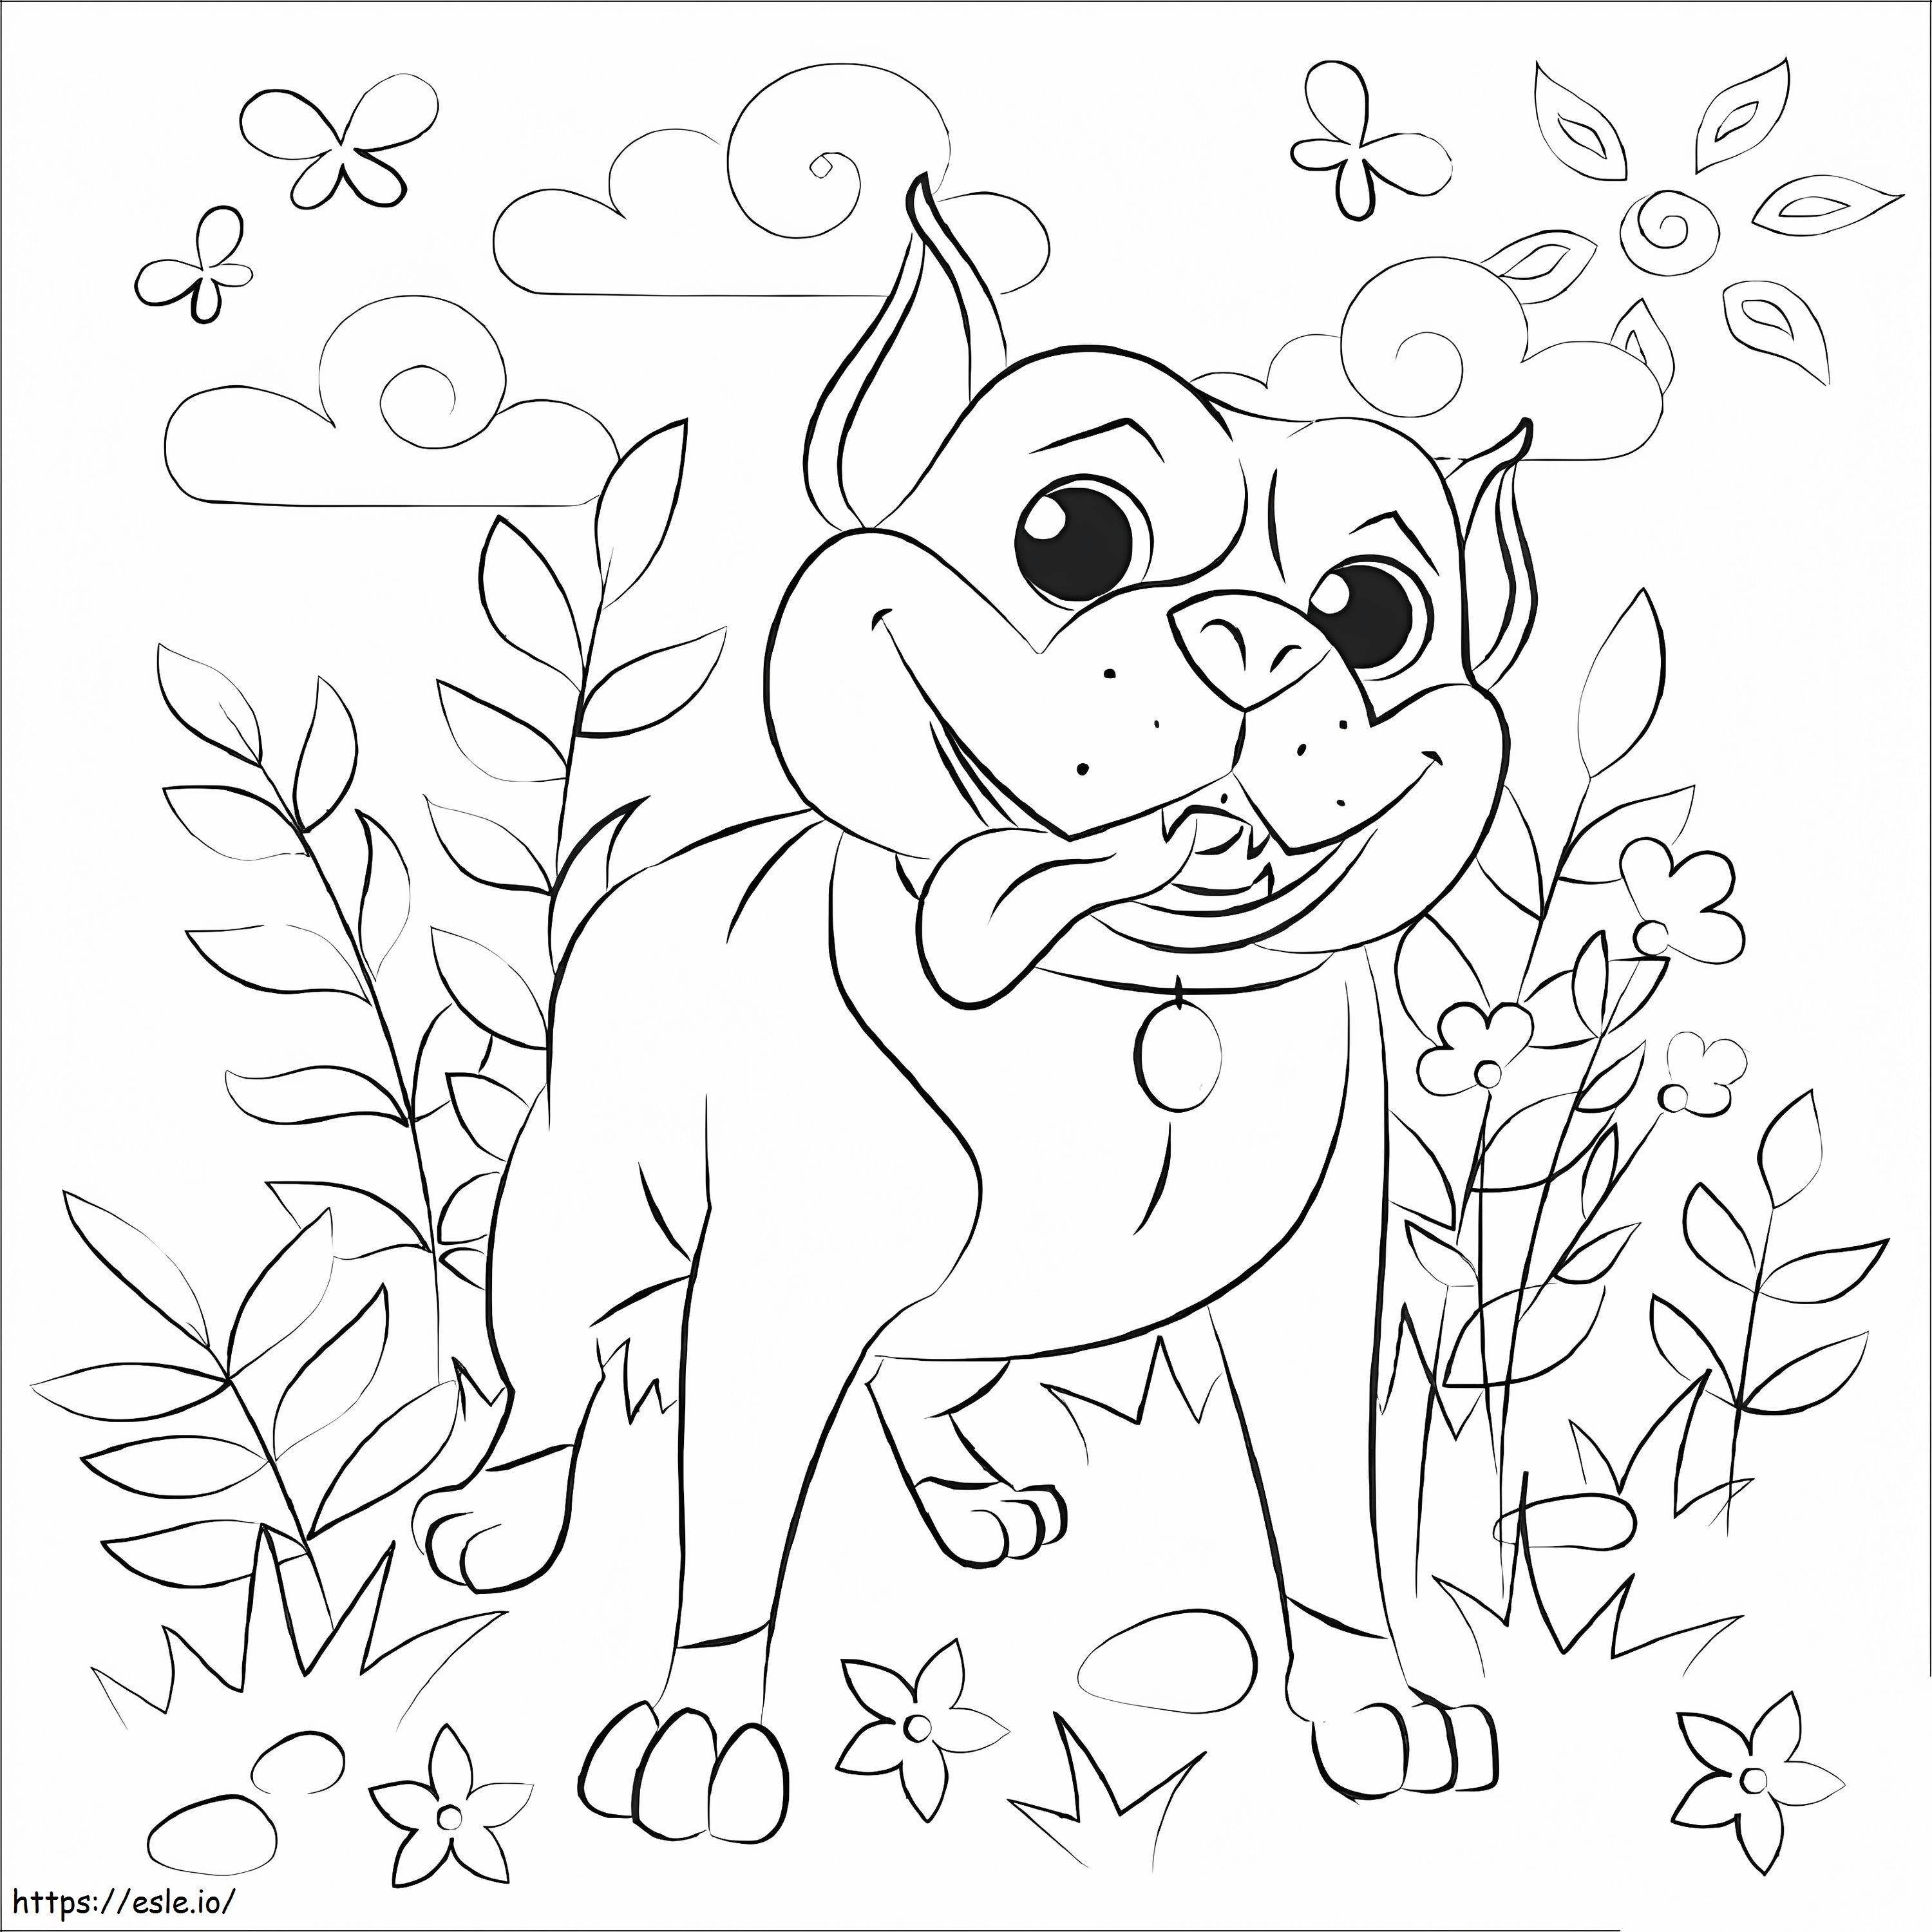 Funny Pitbull coloring page